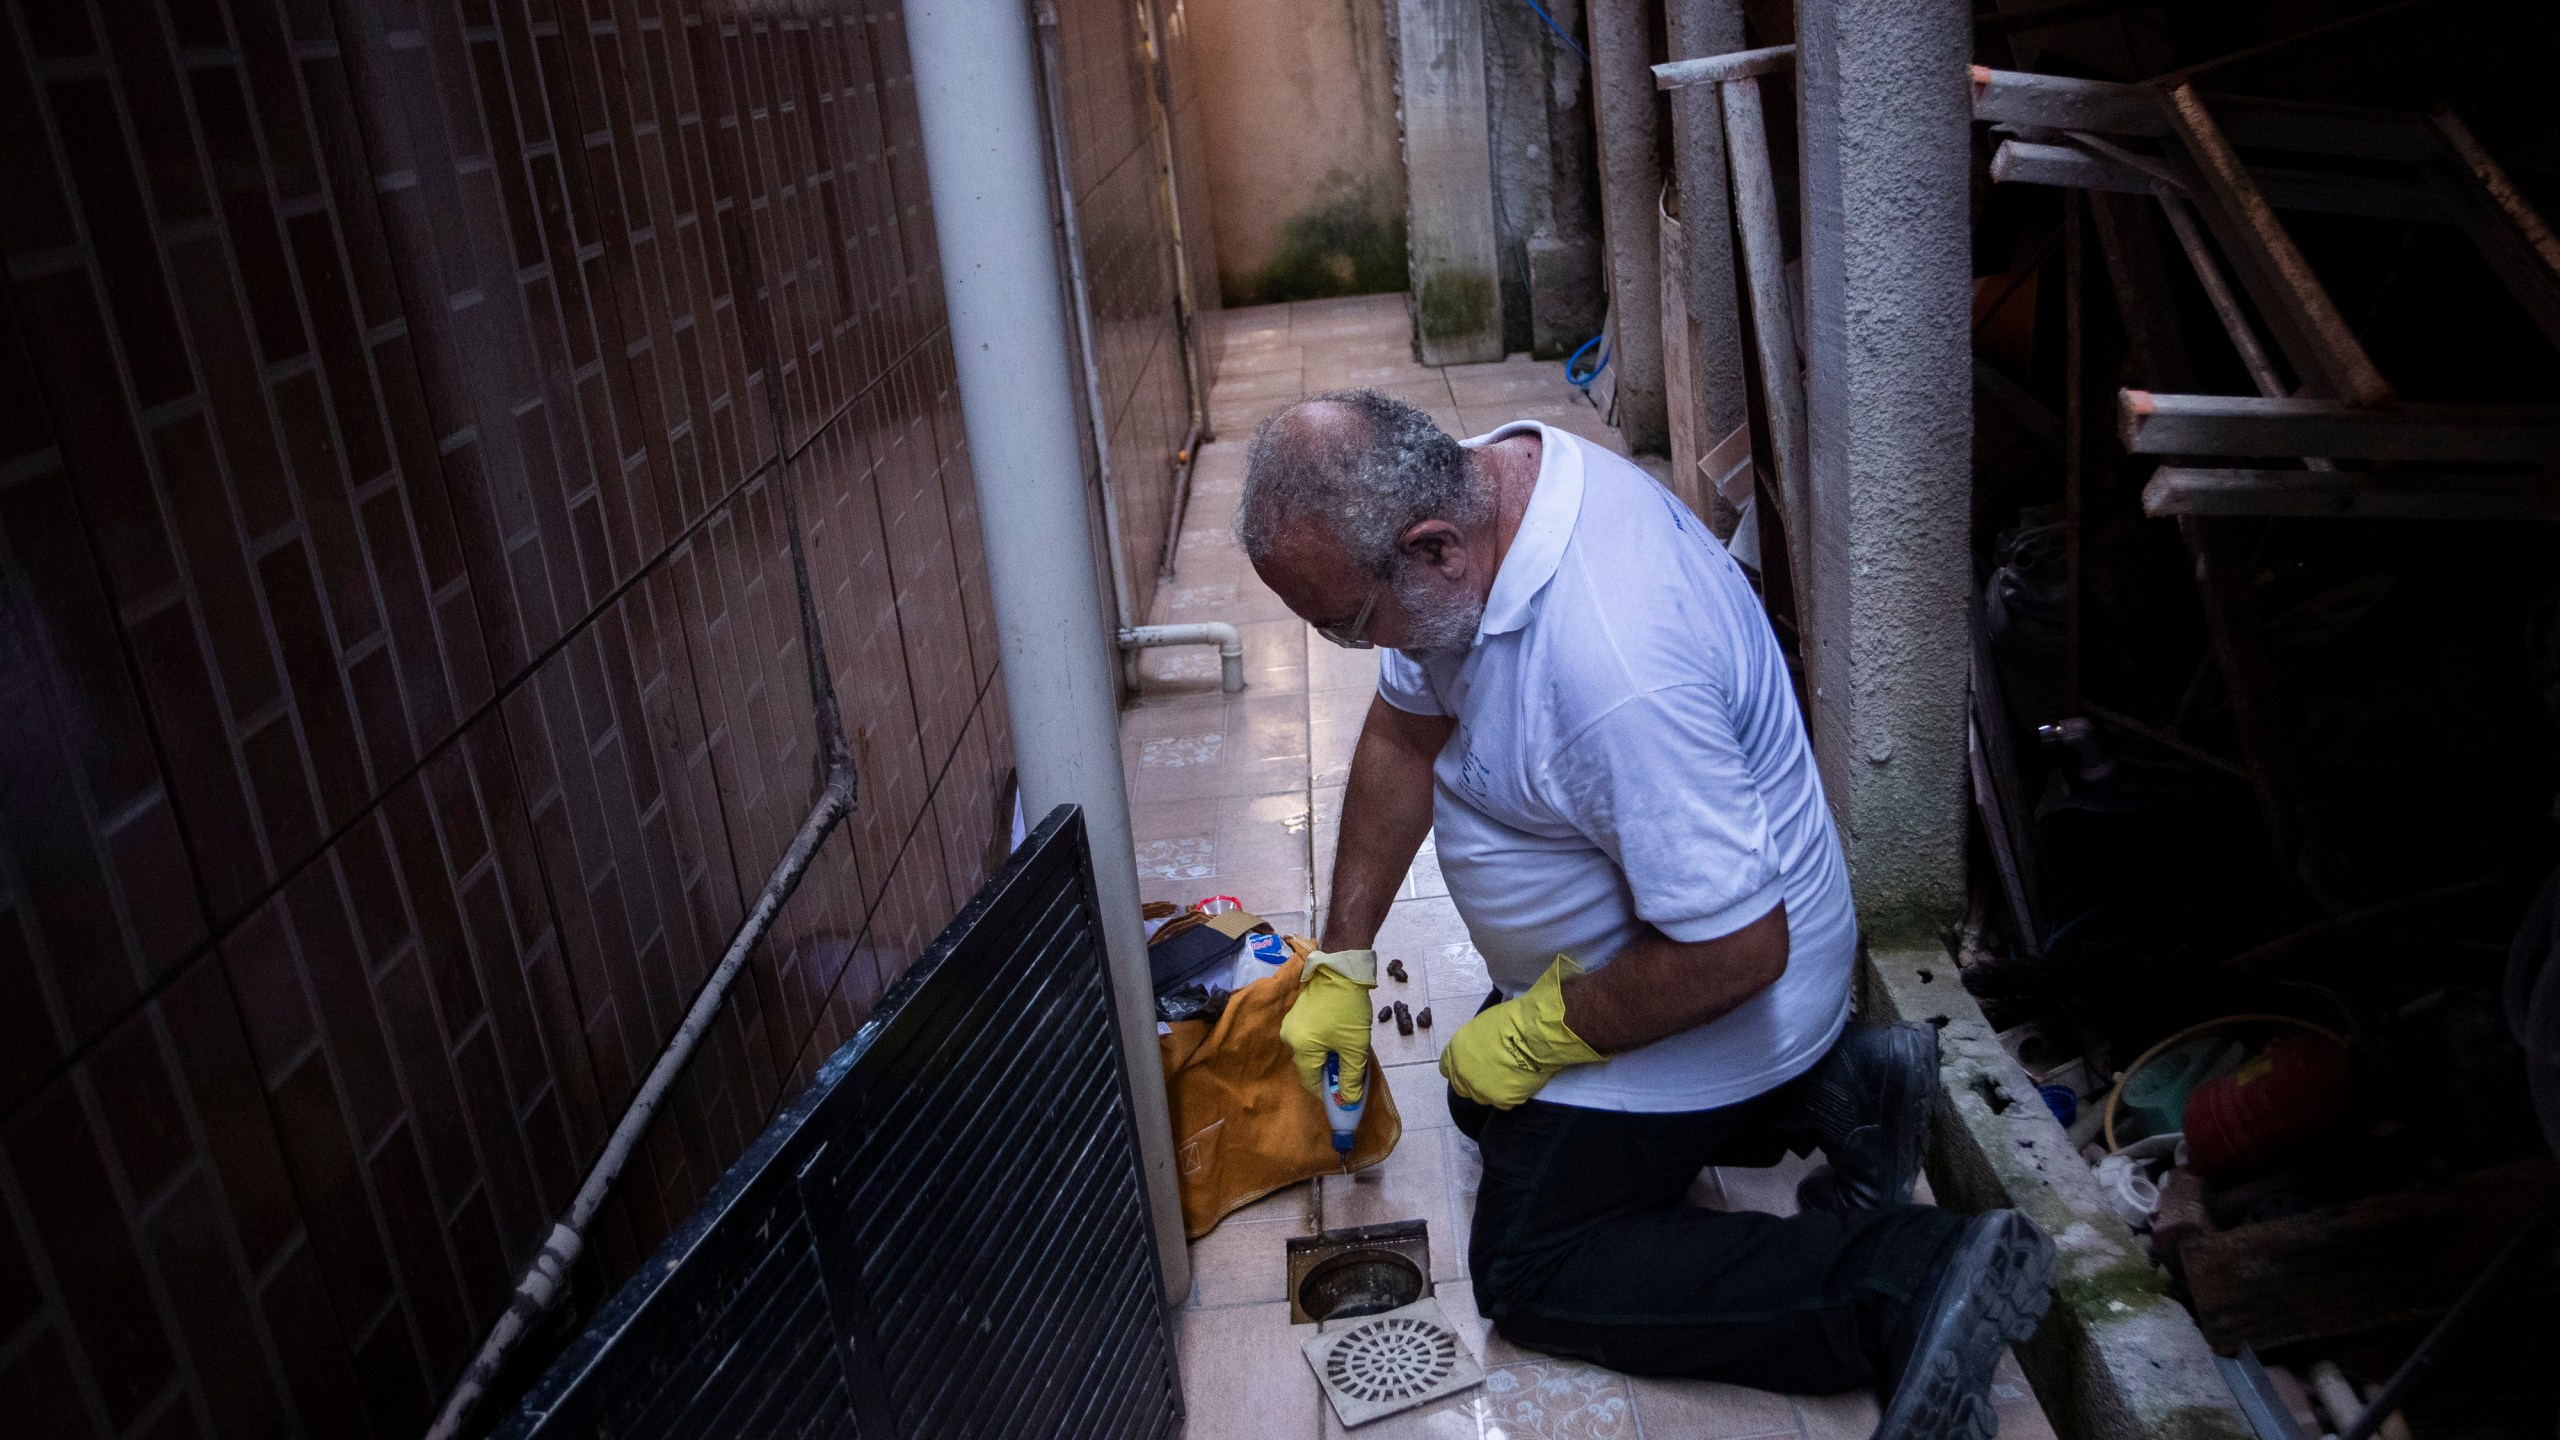 Augusto Cesar, a city worker who combats endemic diseases, pours larvicide down a home's drain where mosquitoes can breed, to help eradicate the Aedes aegypti mosquito which can spread dengue, in the Morro da Penha favela of Niteroi, Brazil, Friday, March 1, 2024. (AP Photo/Bruna Prado)